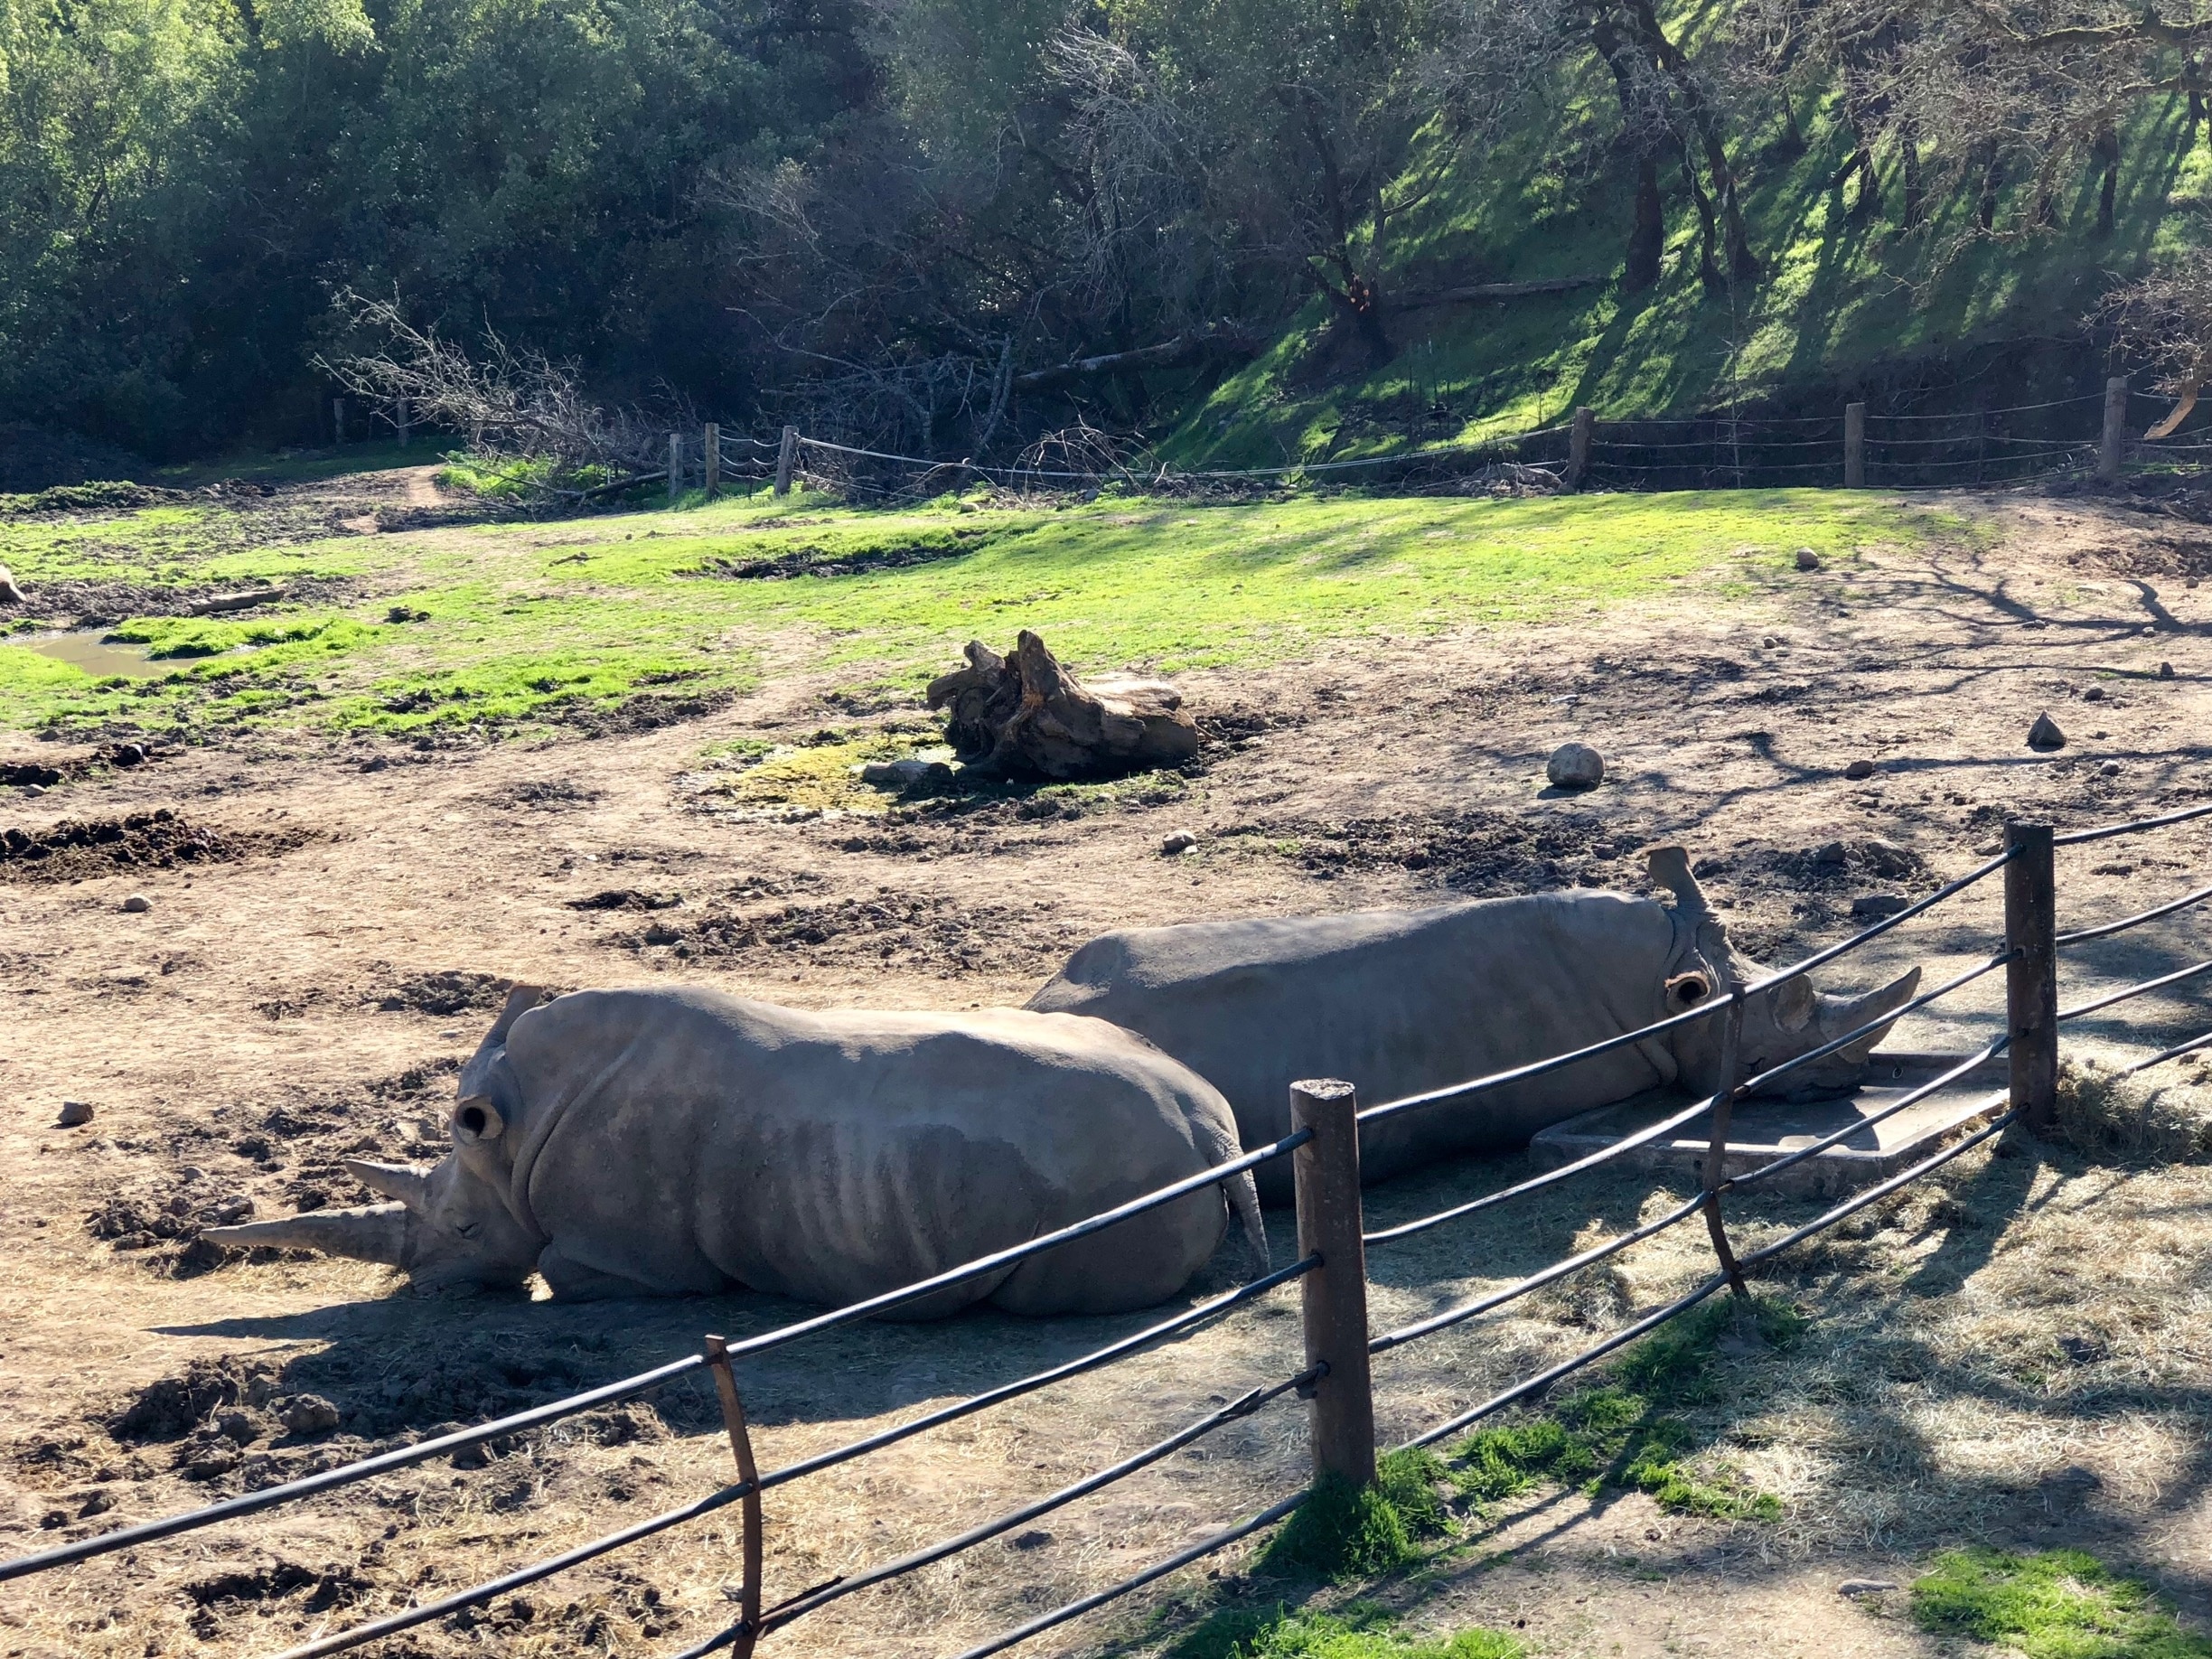 These two rhinos were placed together in hopes of them mating but looks like they’re more interested in lazing around under the California sun 😎 #Wildlife 